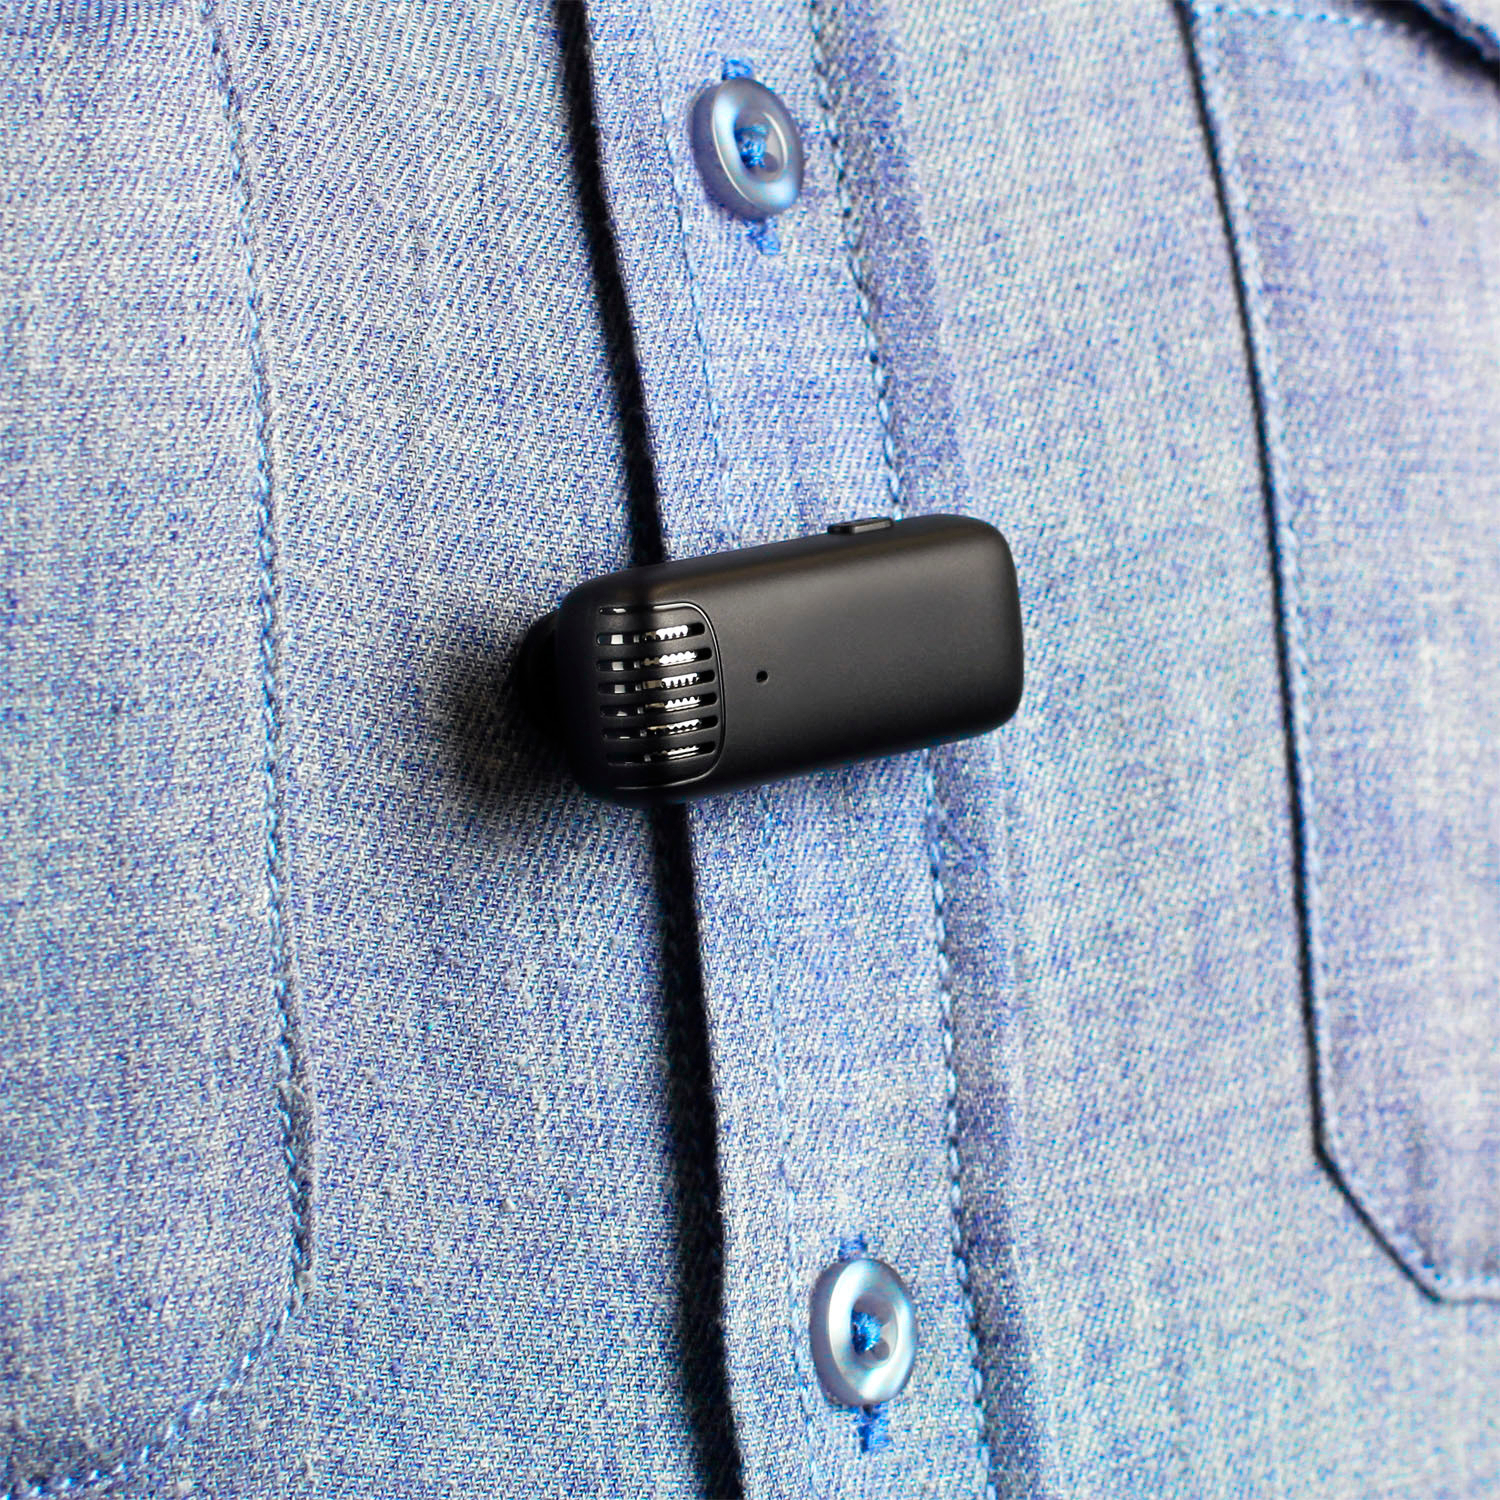 Angle View: Aluratek - Wireless Vlogging Lapel Microphone with Charging Case for Lightning Connector